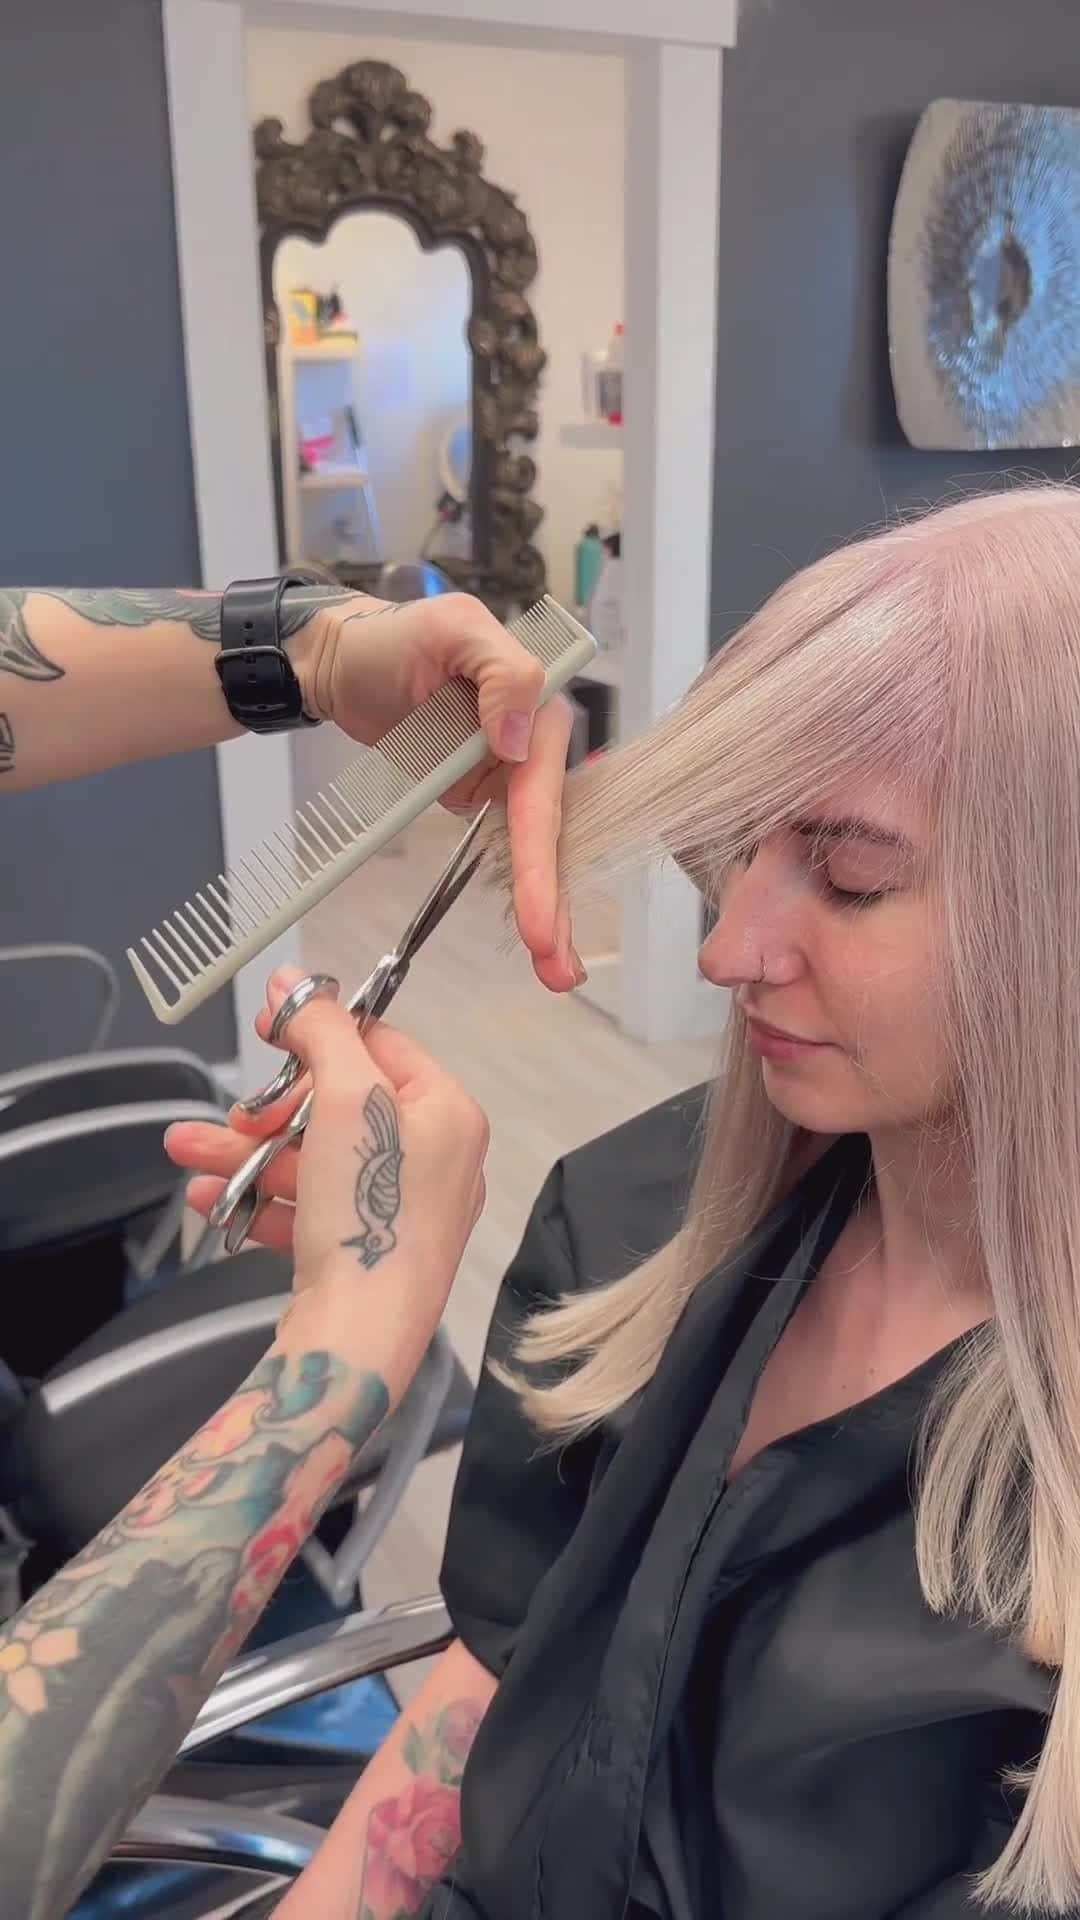 Sam Villaのインスタグラム：「⁠#SnipSnip ✂️ Watch @annetteluxe create the perfect fringe. ⁠ ⁠ Tools Used:⁠ Sam Villa Artist Series Shear 6.25"⁠ ⁠ About These Shears: ⁠ Sharper, harder blades and a sculpted handle that fits perfectly in your hand. Every detail on our Artist Series 6.25” Shear is expertly crafted for ultimate comfort and precision control. Contoured blades slide seamlessly through all types of hair, and the shear responds to the slightest input from your hand. Powerful enough for deep point cutting and delicate enough for detail work, this versatile shear will quickly become your go-to tool. ⁠ ⁠ #SamVilla⁠ #SamVillaCommunity⁠ .⁠ .⁠ .⁠ .⁠ .⁠ #haircutting #samvilla #hairtutorial #hairvideo #haircut #hairstylist #behindthechair #modernsalon #americansalon #blondehair #faceframe #freshhaircut #newhair #beforeandafter」